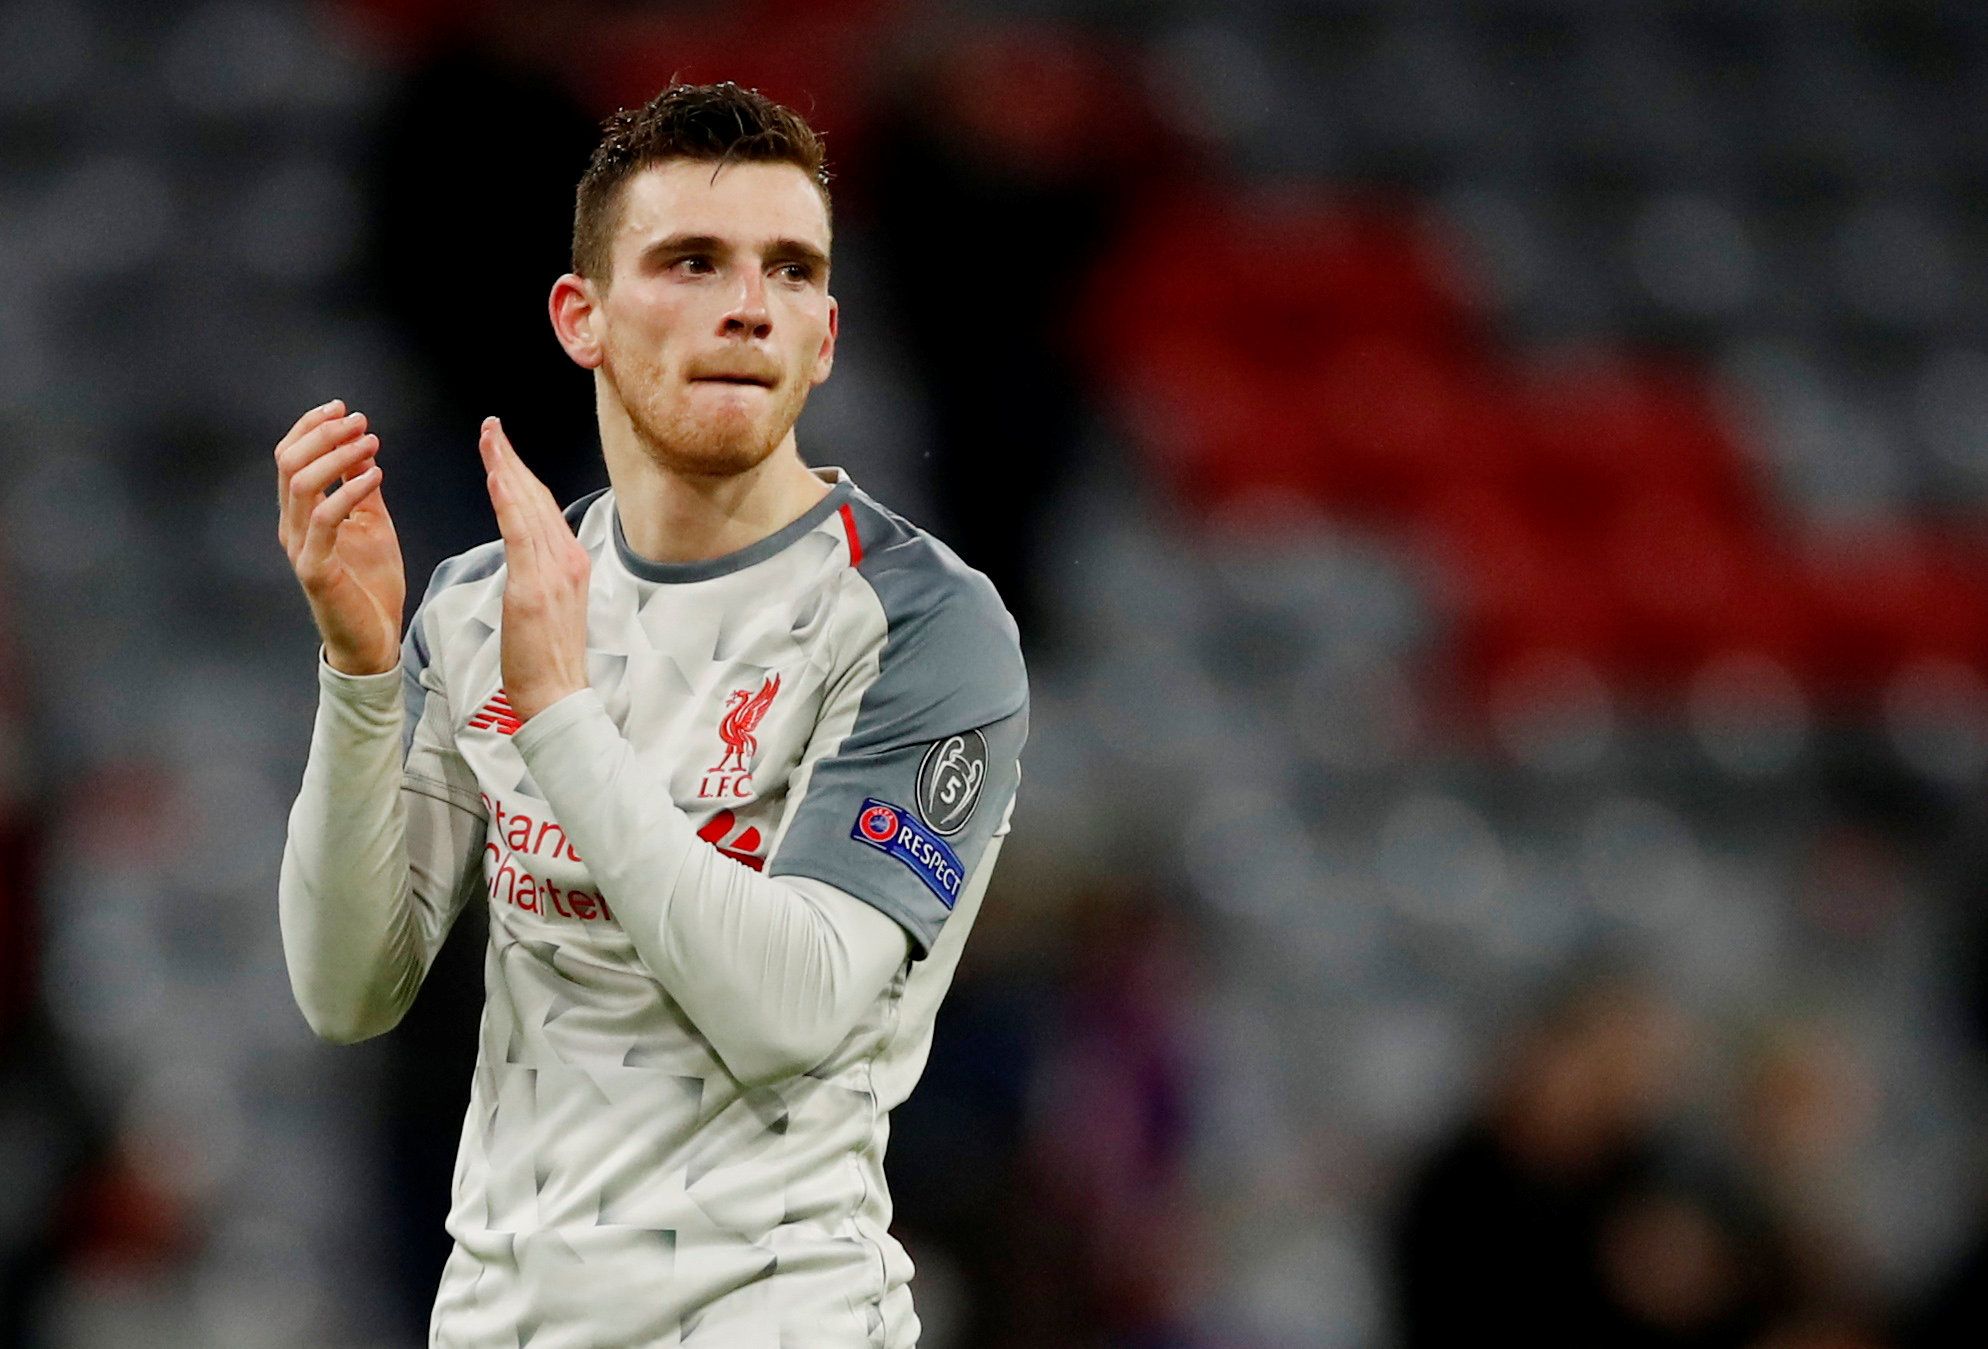 Soccer Football - Champions League - Round of 16 Second Leg - Bayern Munich v Liverpool - Allianz Arena, Munich, Germany - March 13, 2019  Liverpool's Andrew Robertson applauds the fans after the match  Action Images via Reuters/Andrew Boyers